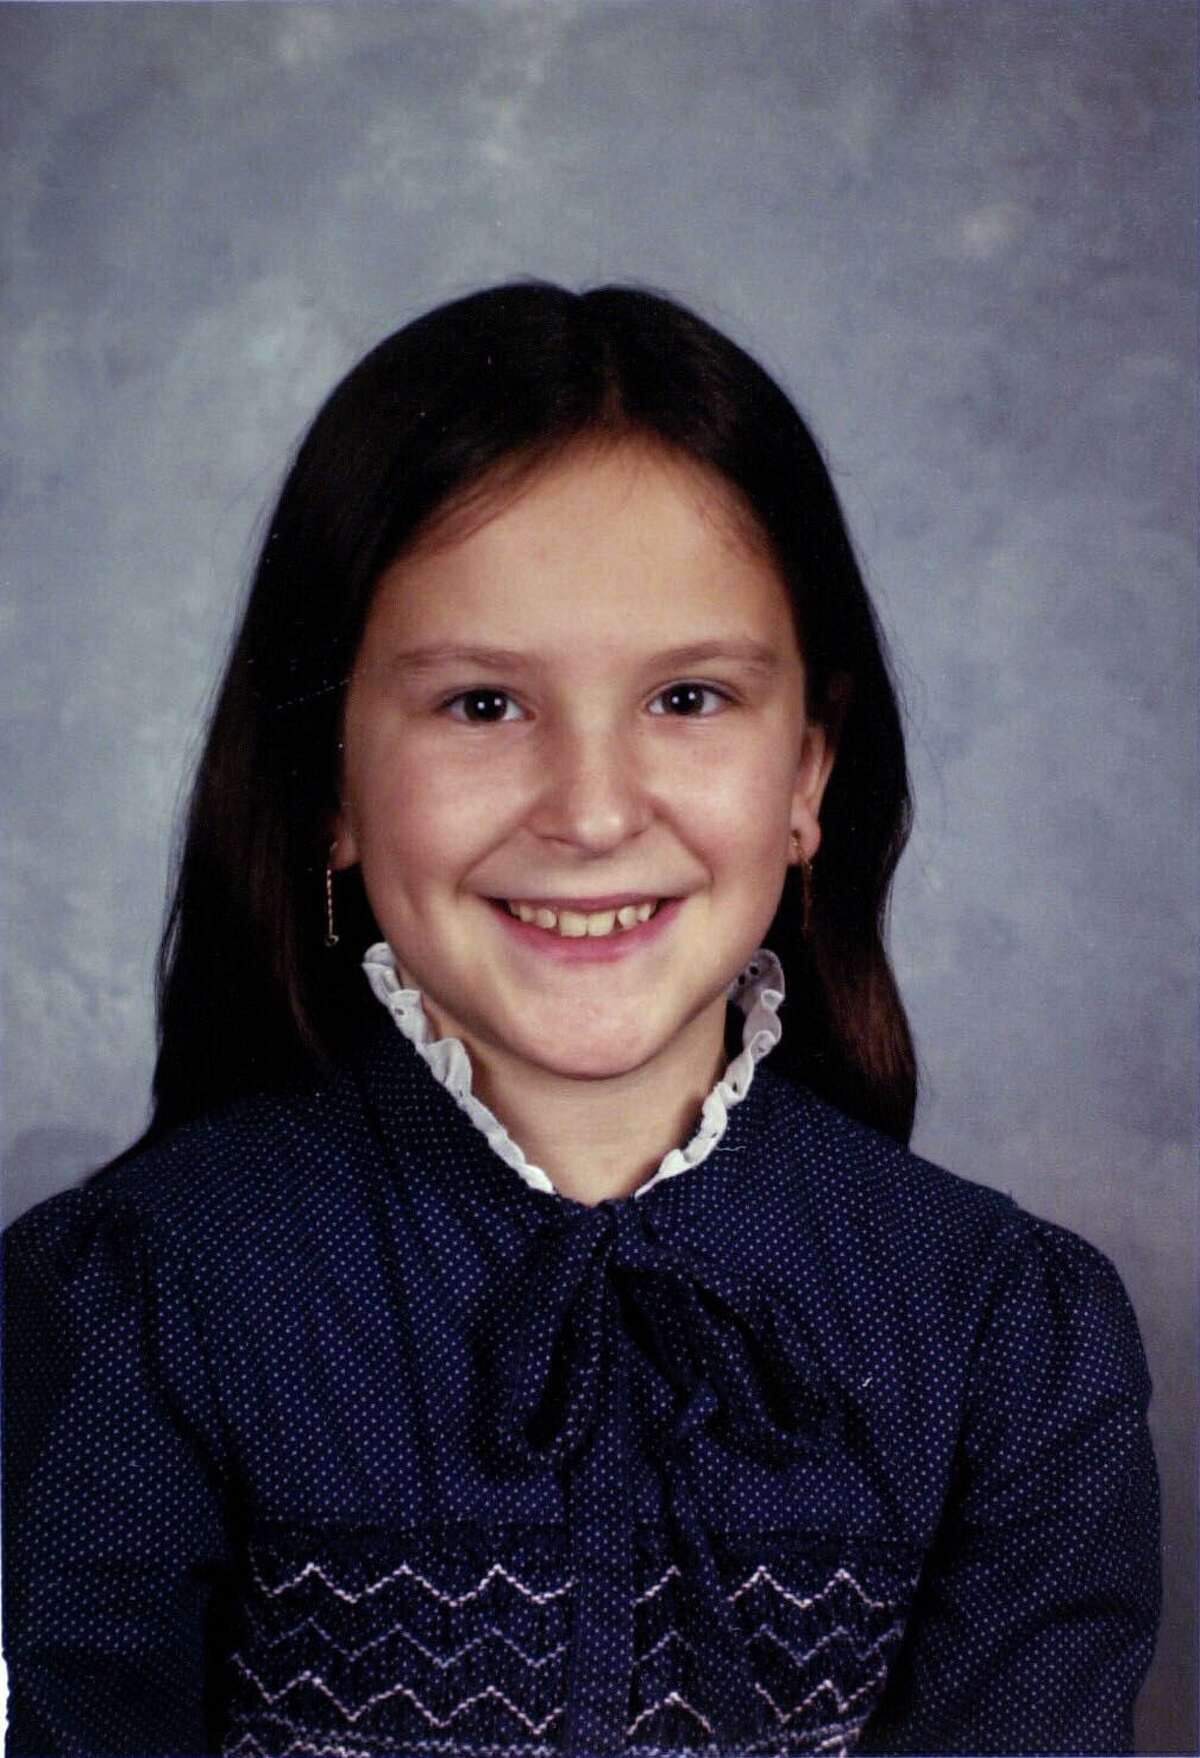 Fourth grade school photo of Kathleen Marie Flynn who was raped and murdered in 1986 while walking home from school.